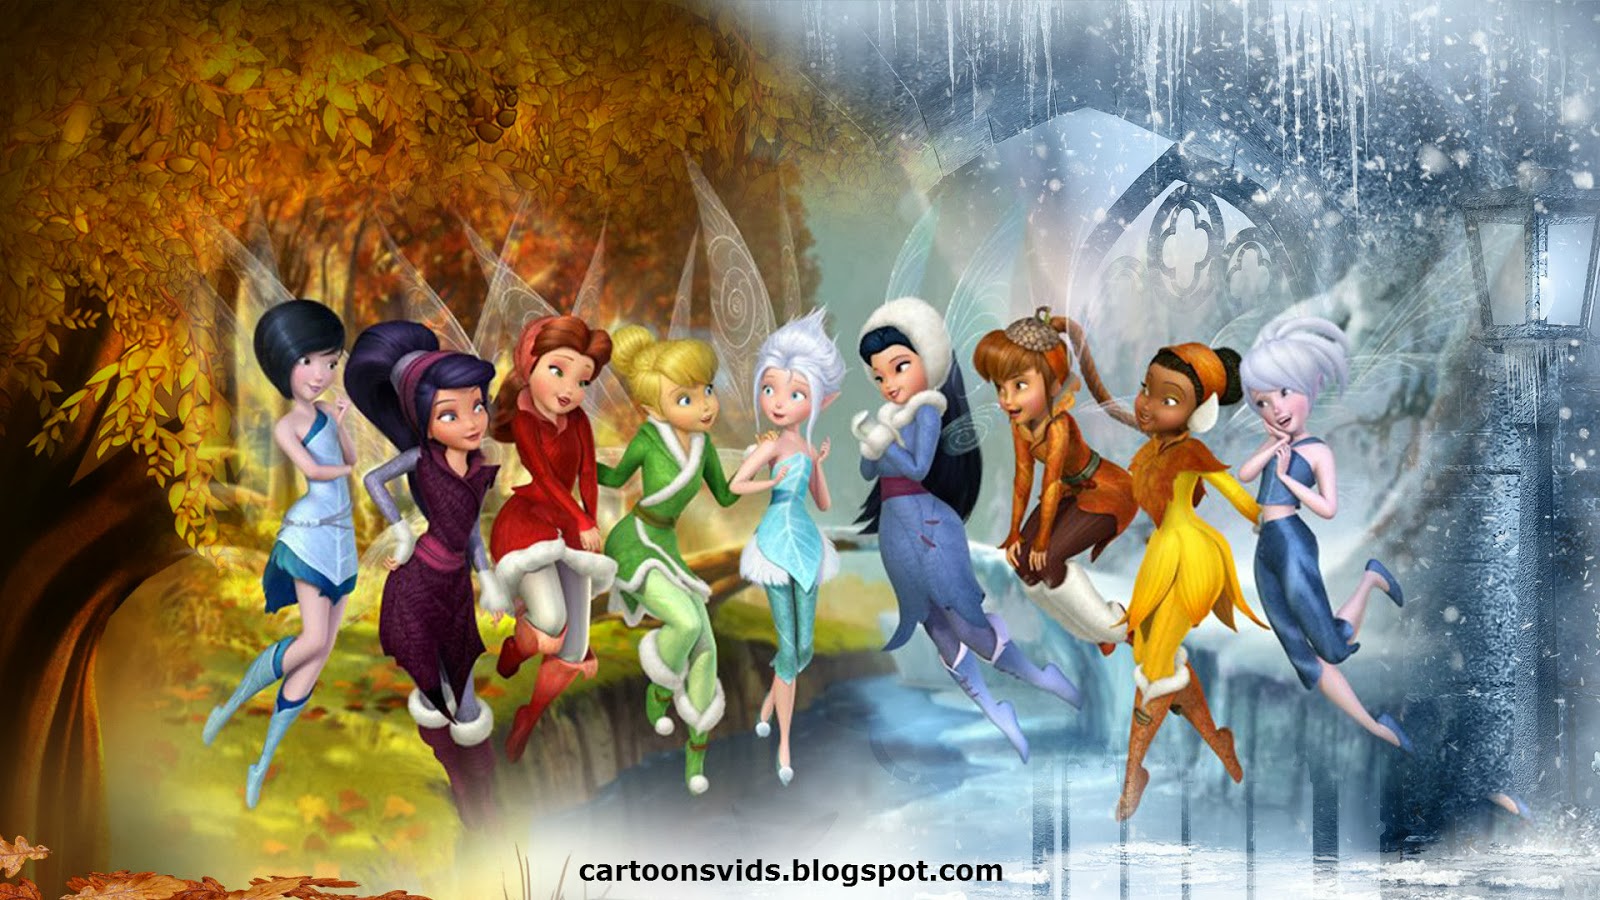 In secret of the wings we meet with the inseparable friend of peter pan, th...